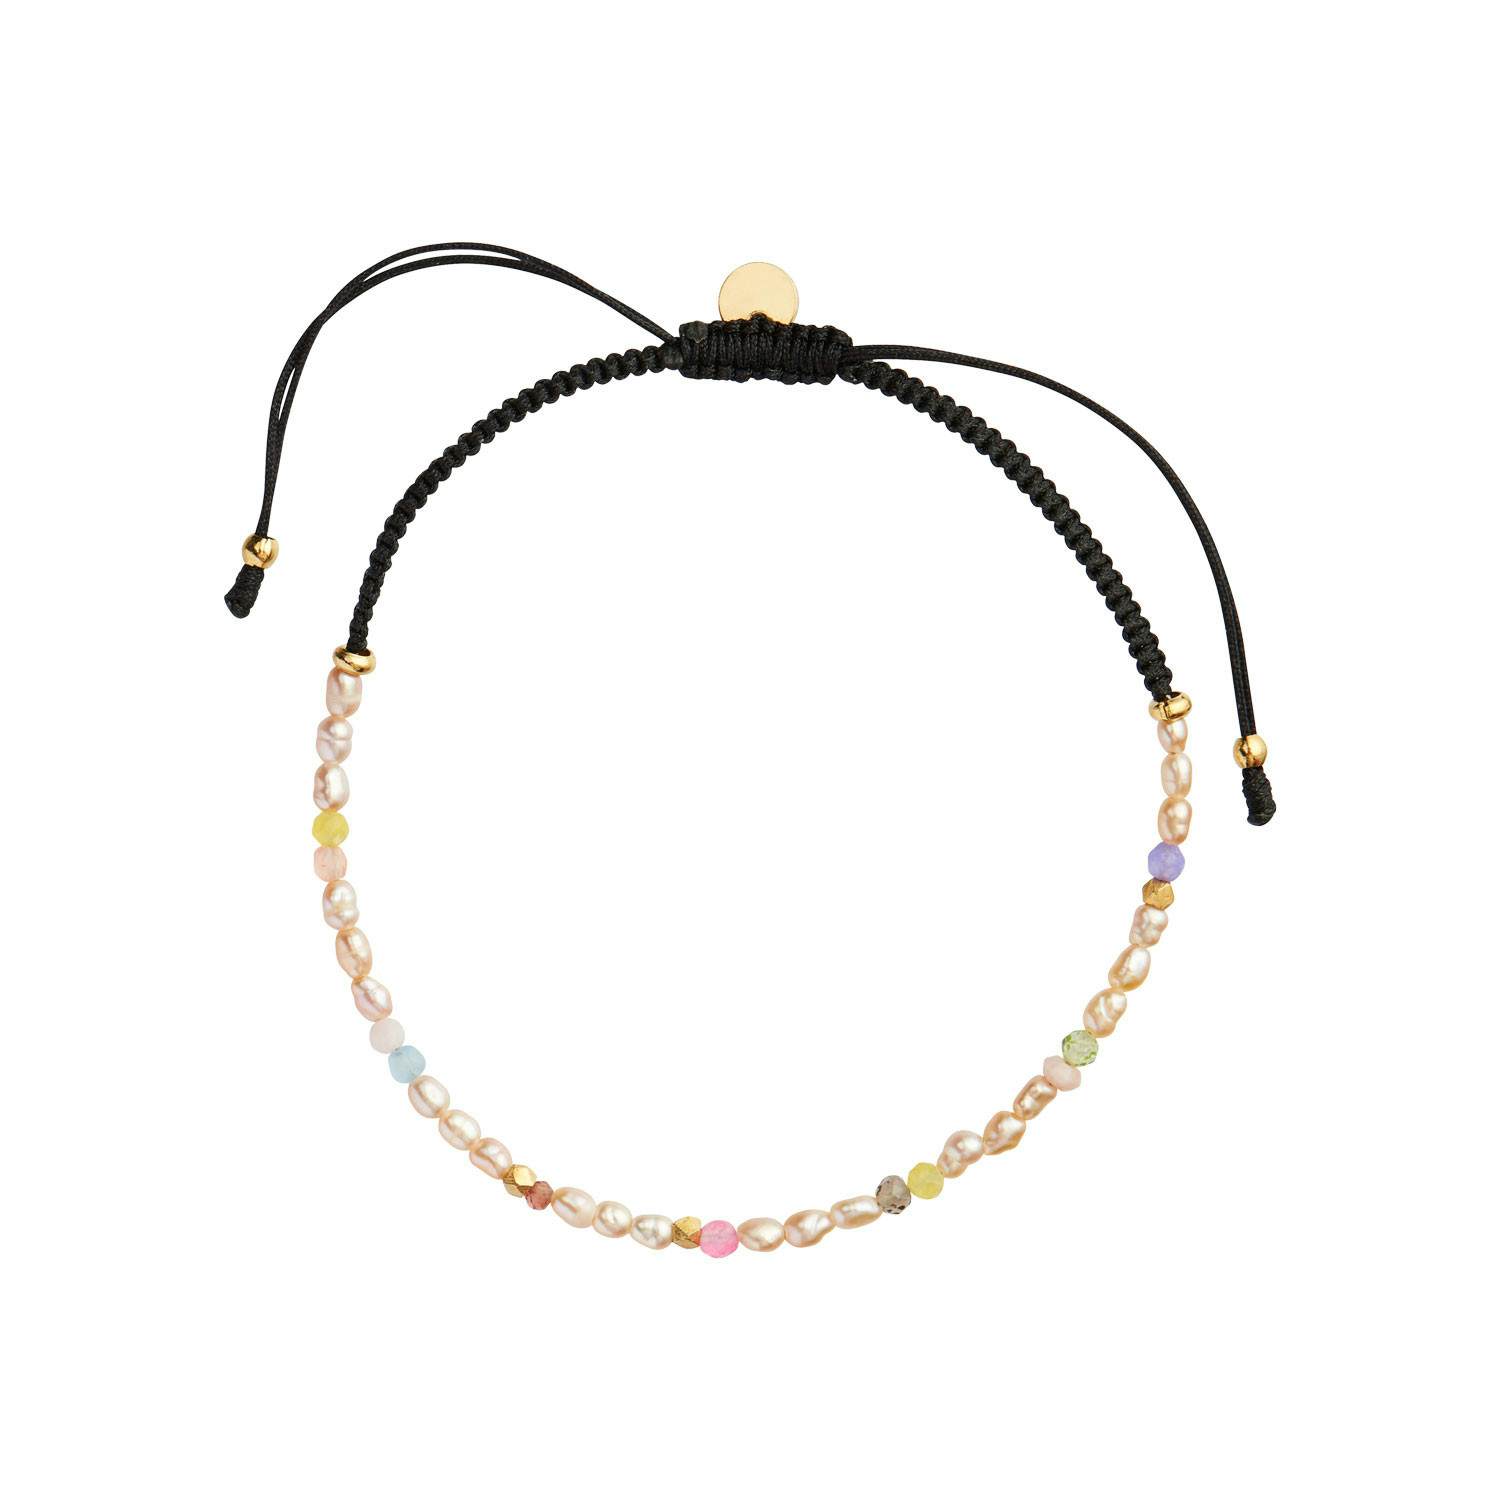 Confetti Pearl Bracelet With Beige And Pastel Mix with Black Ribbon from STINE A Jewelry in Nylon